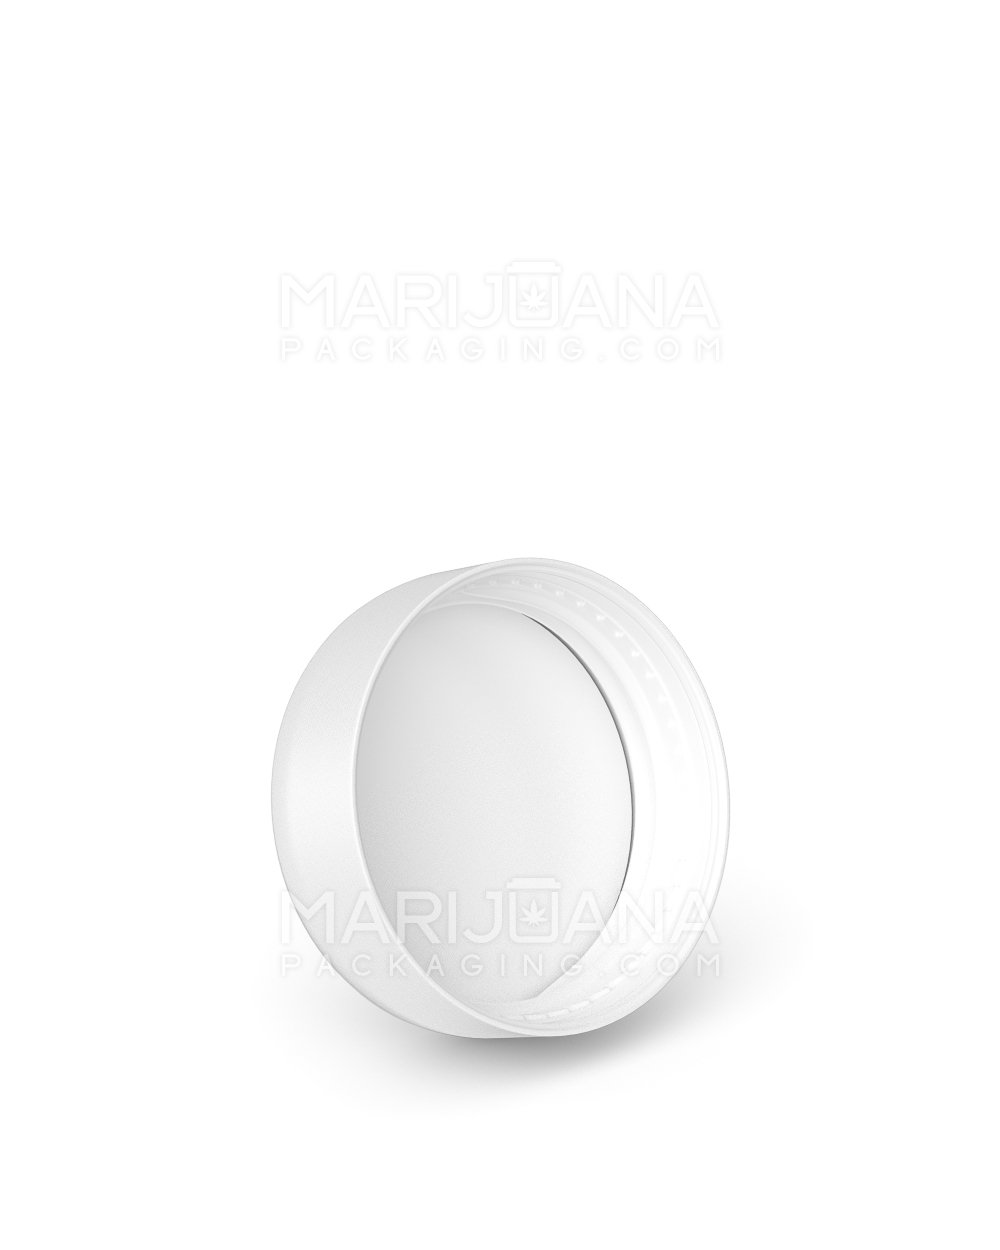 Child Resistant | Smooth Push Down & Turn Plastic Caps w/ Foam Liner | 32mm - Semi Gloss White - 320 Count - 2